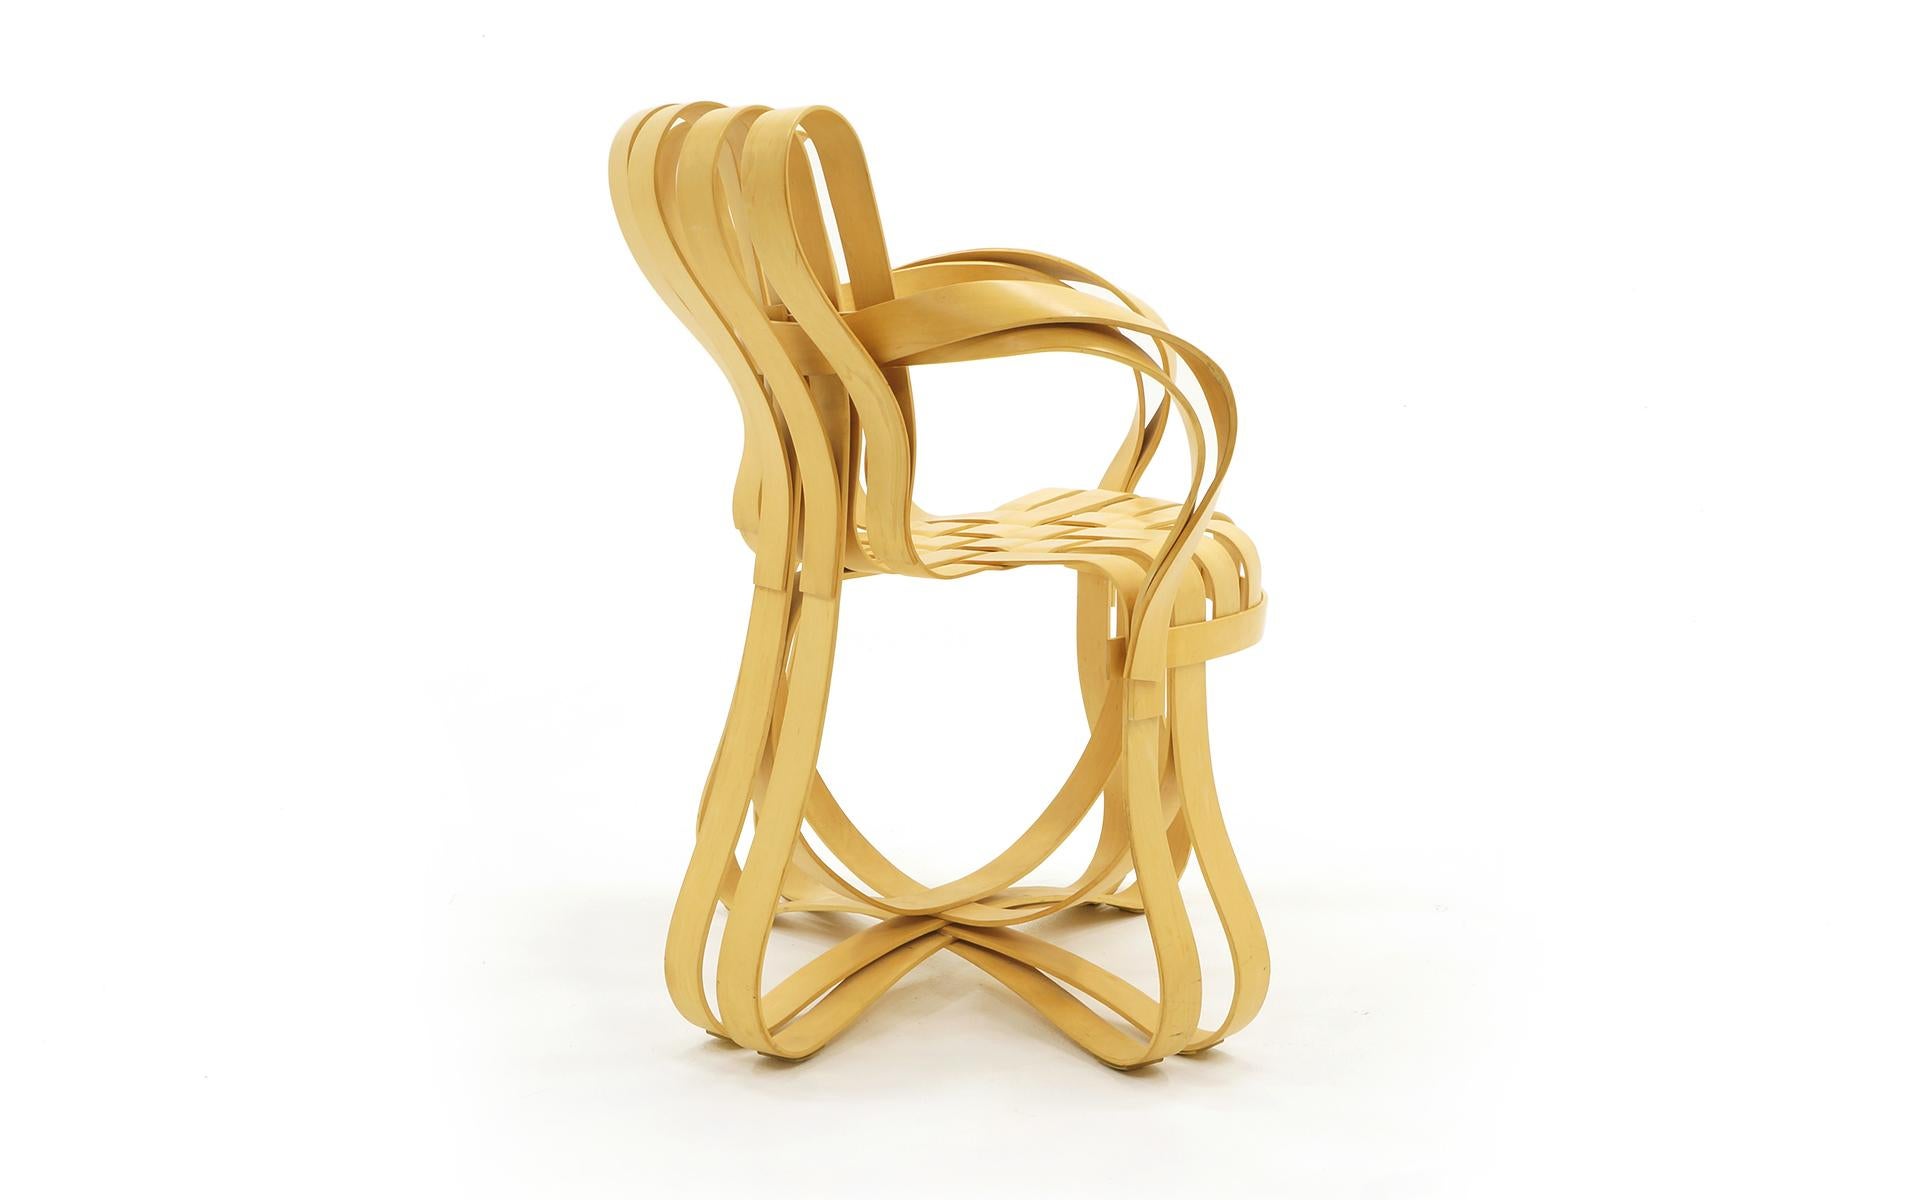 Modern Authentic Cross Check Chair by Frank Gehry for Knoll,  Bent Wood with Arms